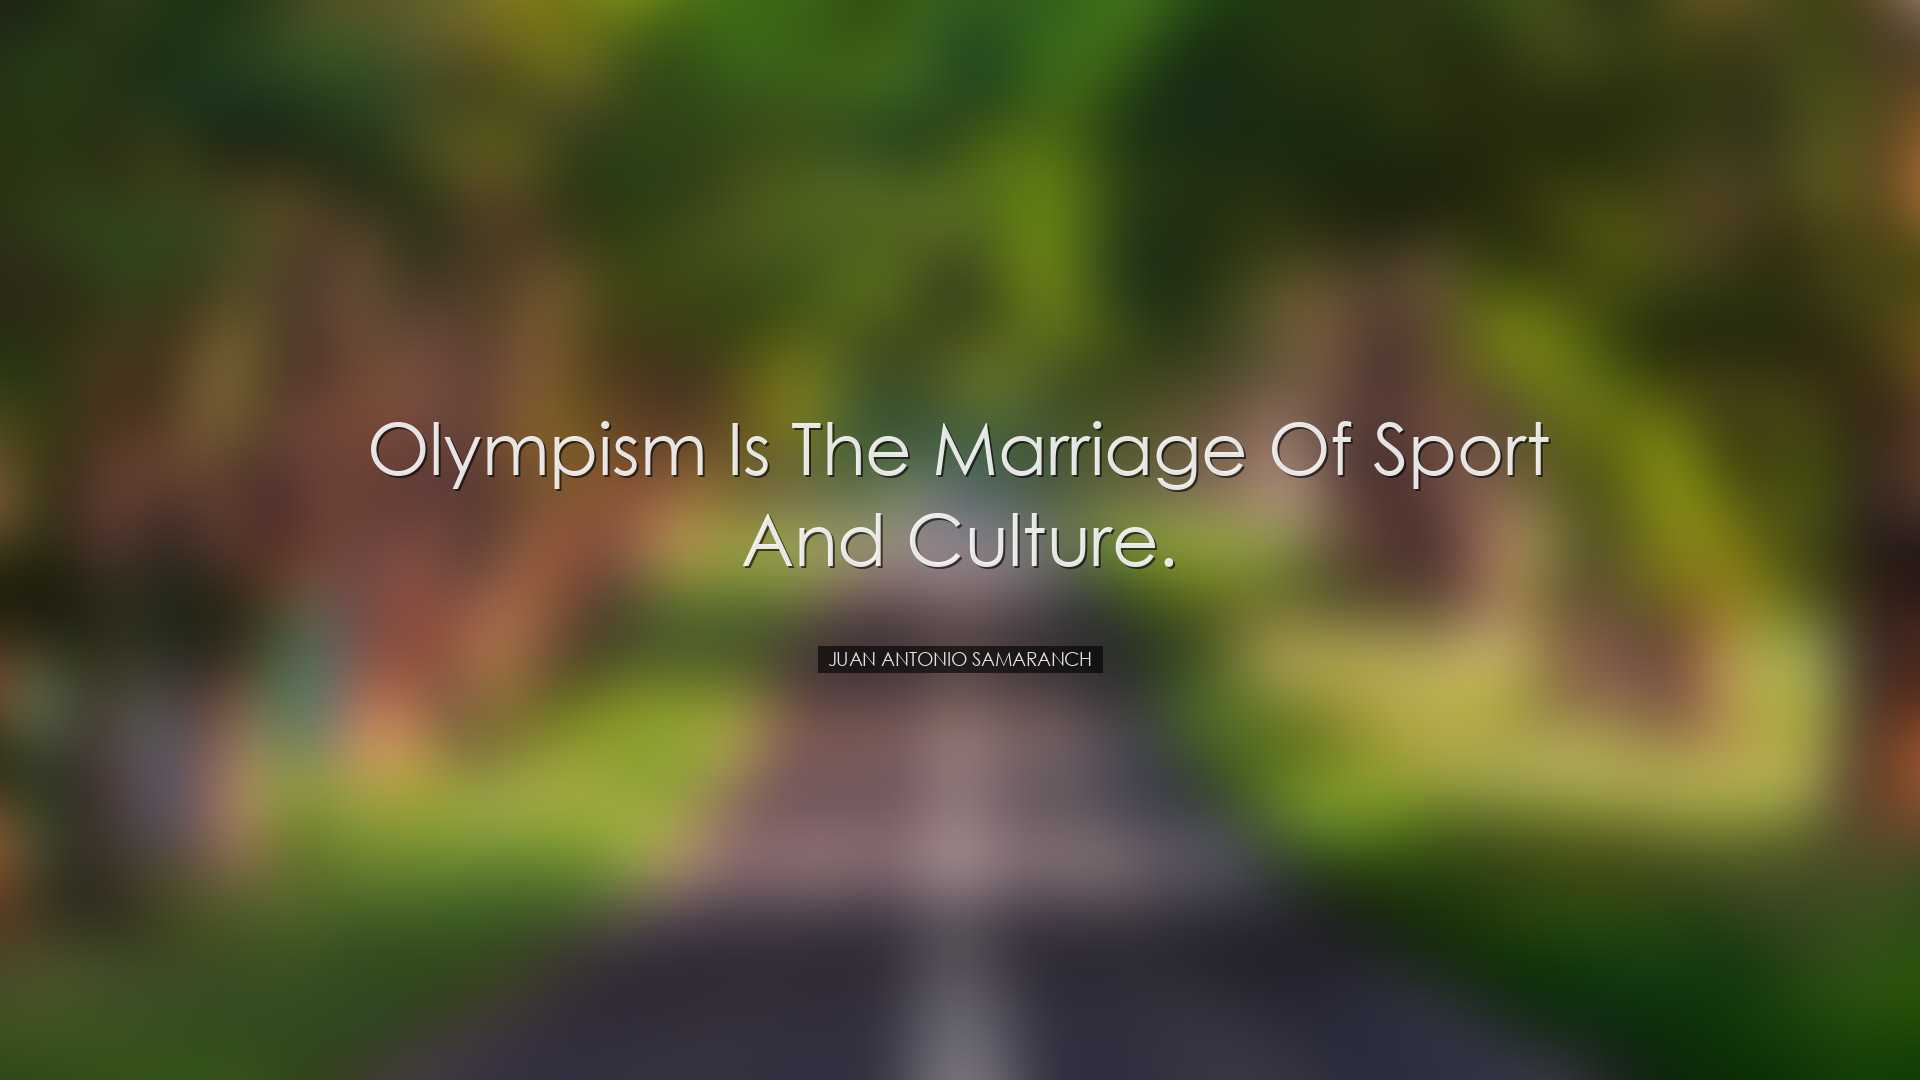 Olympism is the marriage of sport and culture. - Juan Antonio Sama